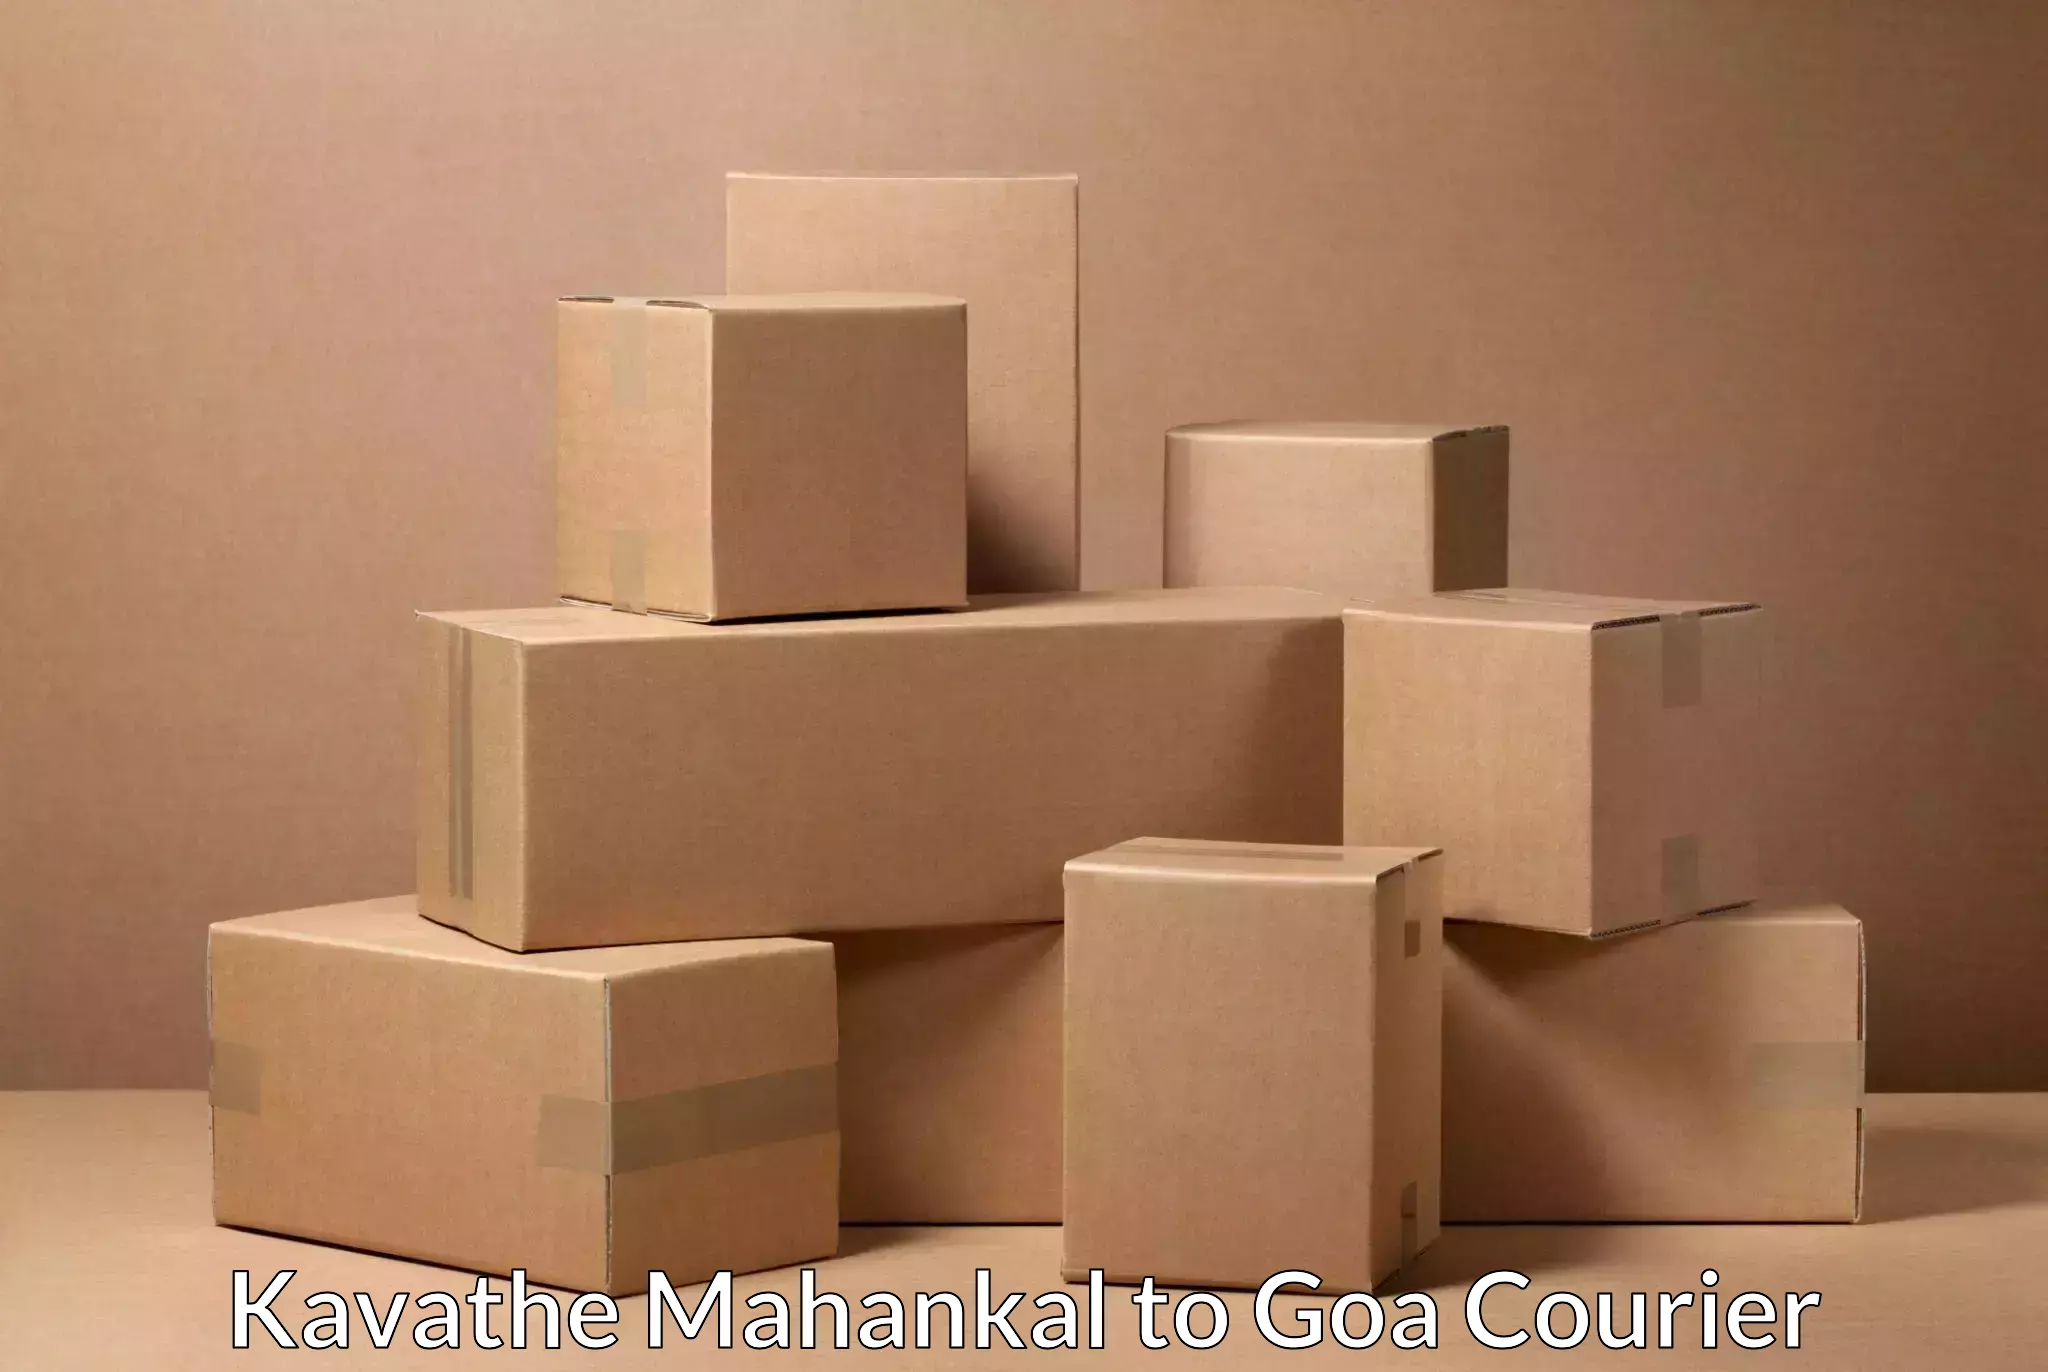 Air courier services in Kavathe Mahankal to South Goa